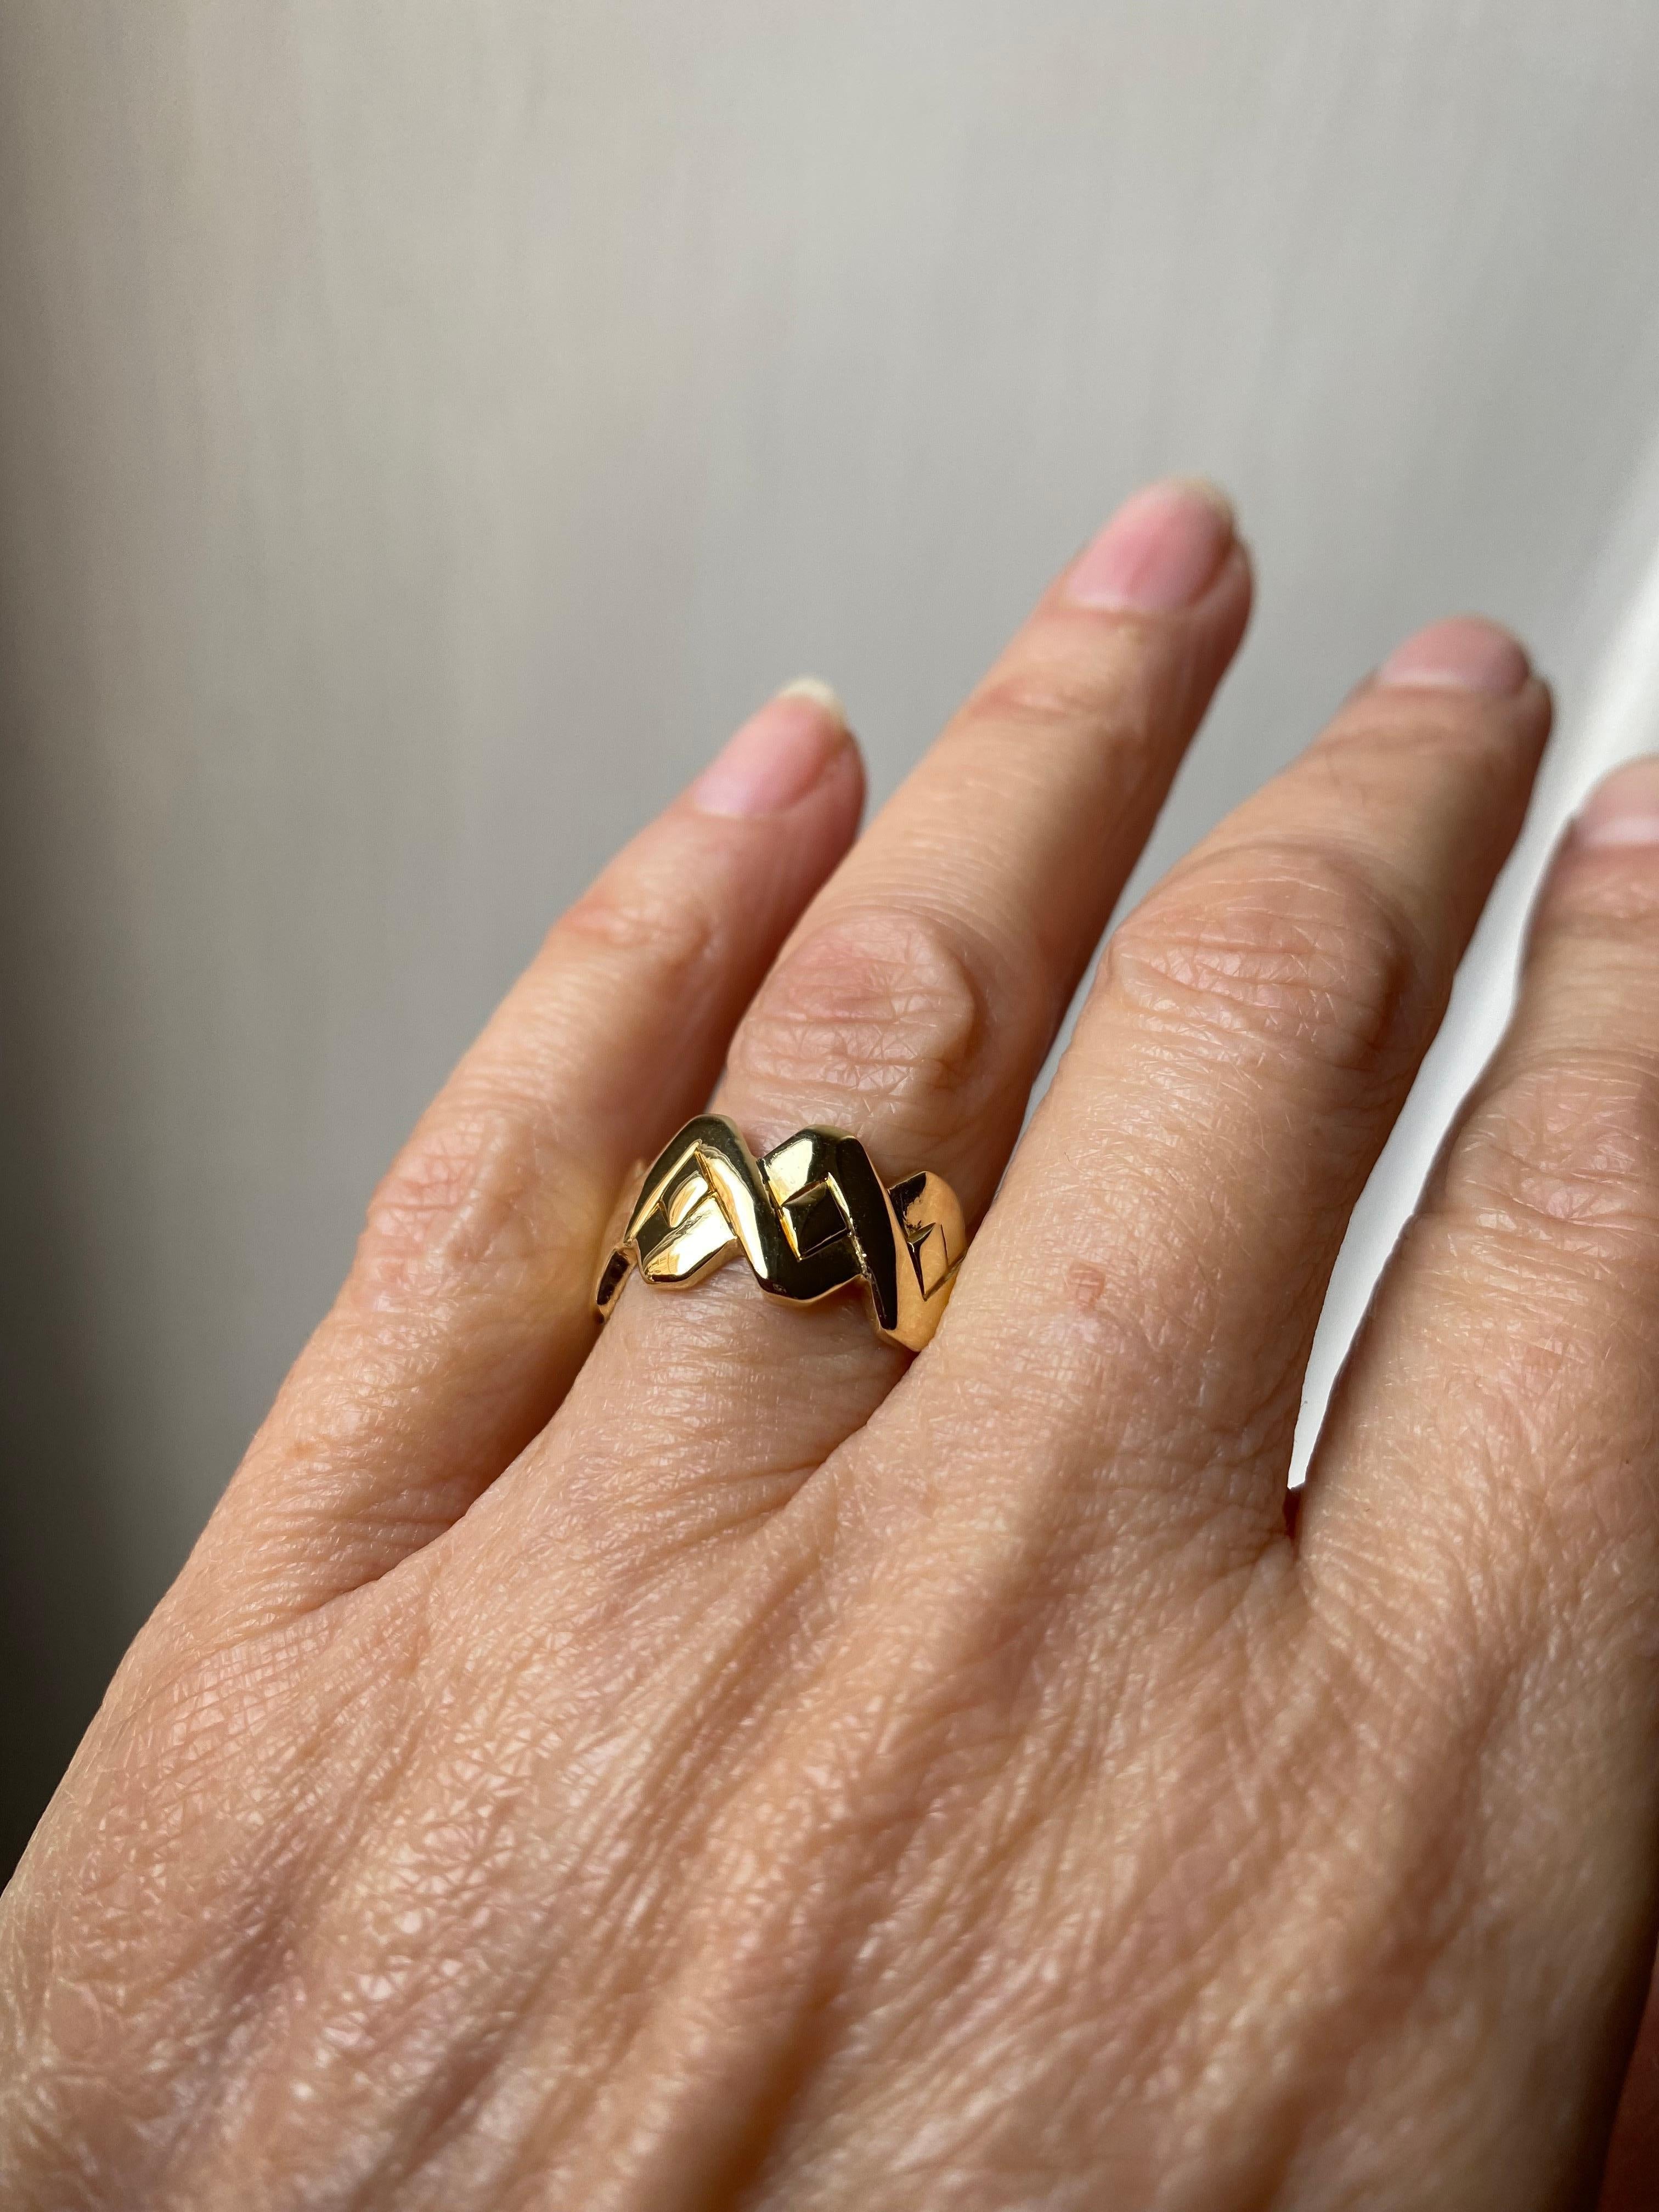 Rossella Ugolini Design Collection, Handcrafted twisted shape Unisex Band Ring. The hand carved surface is shaped with two twisting strips forming a square space in the middle. Everyday jewel, a Gold Ring that finishes off every outfit, a playful